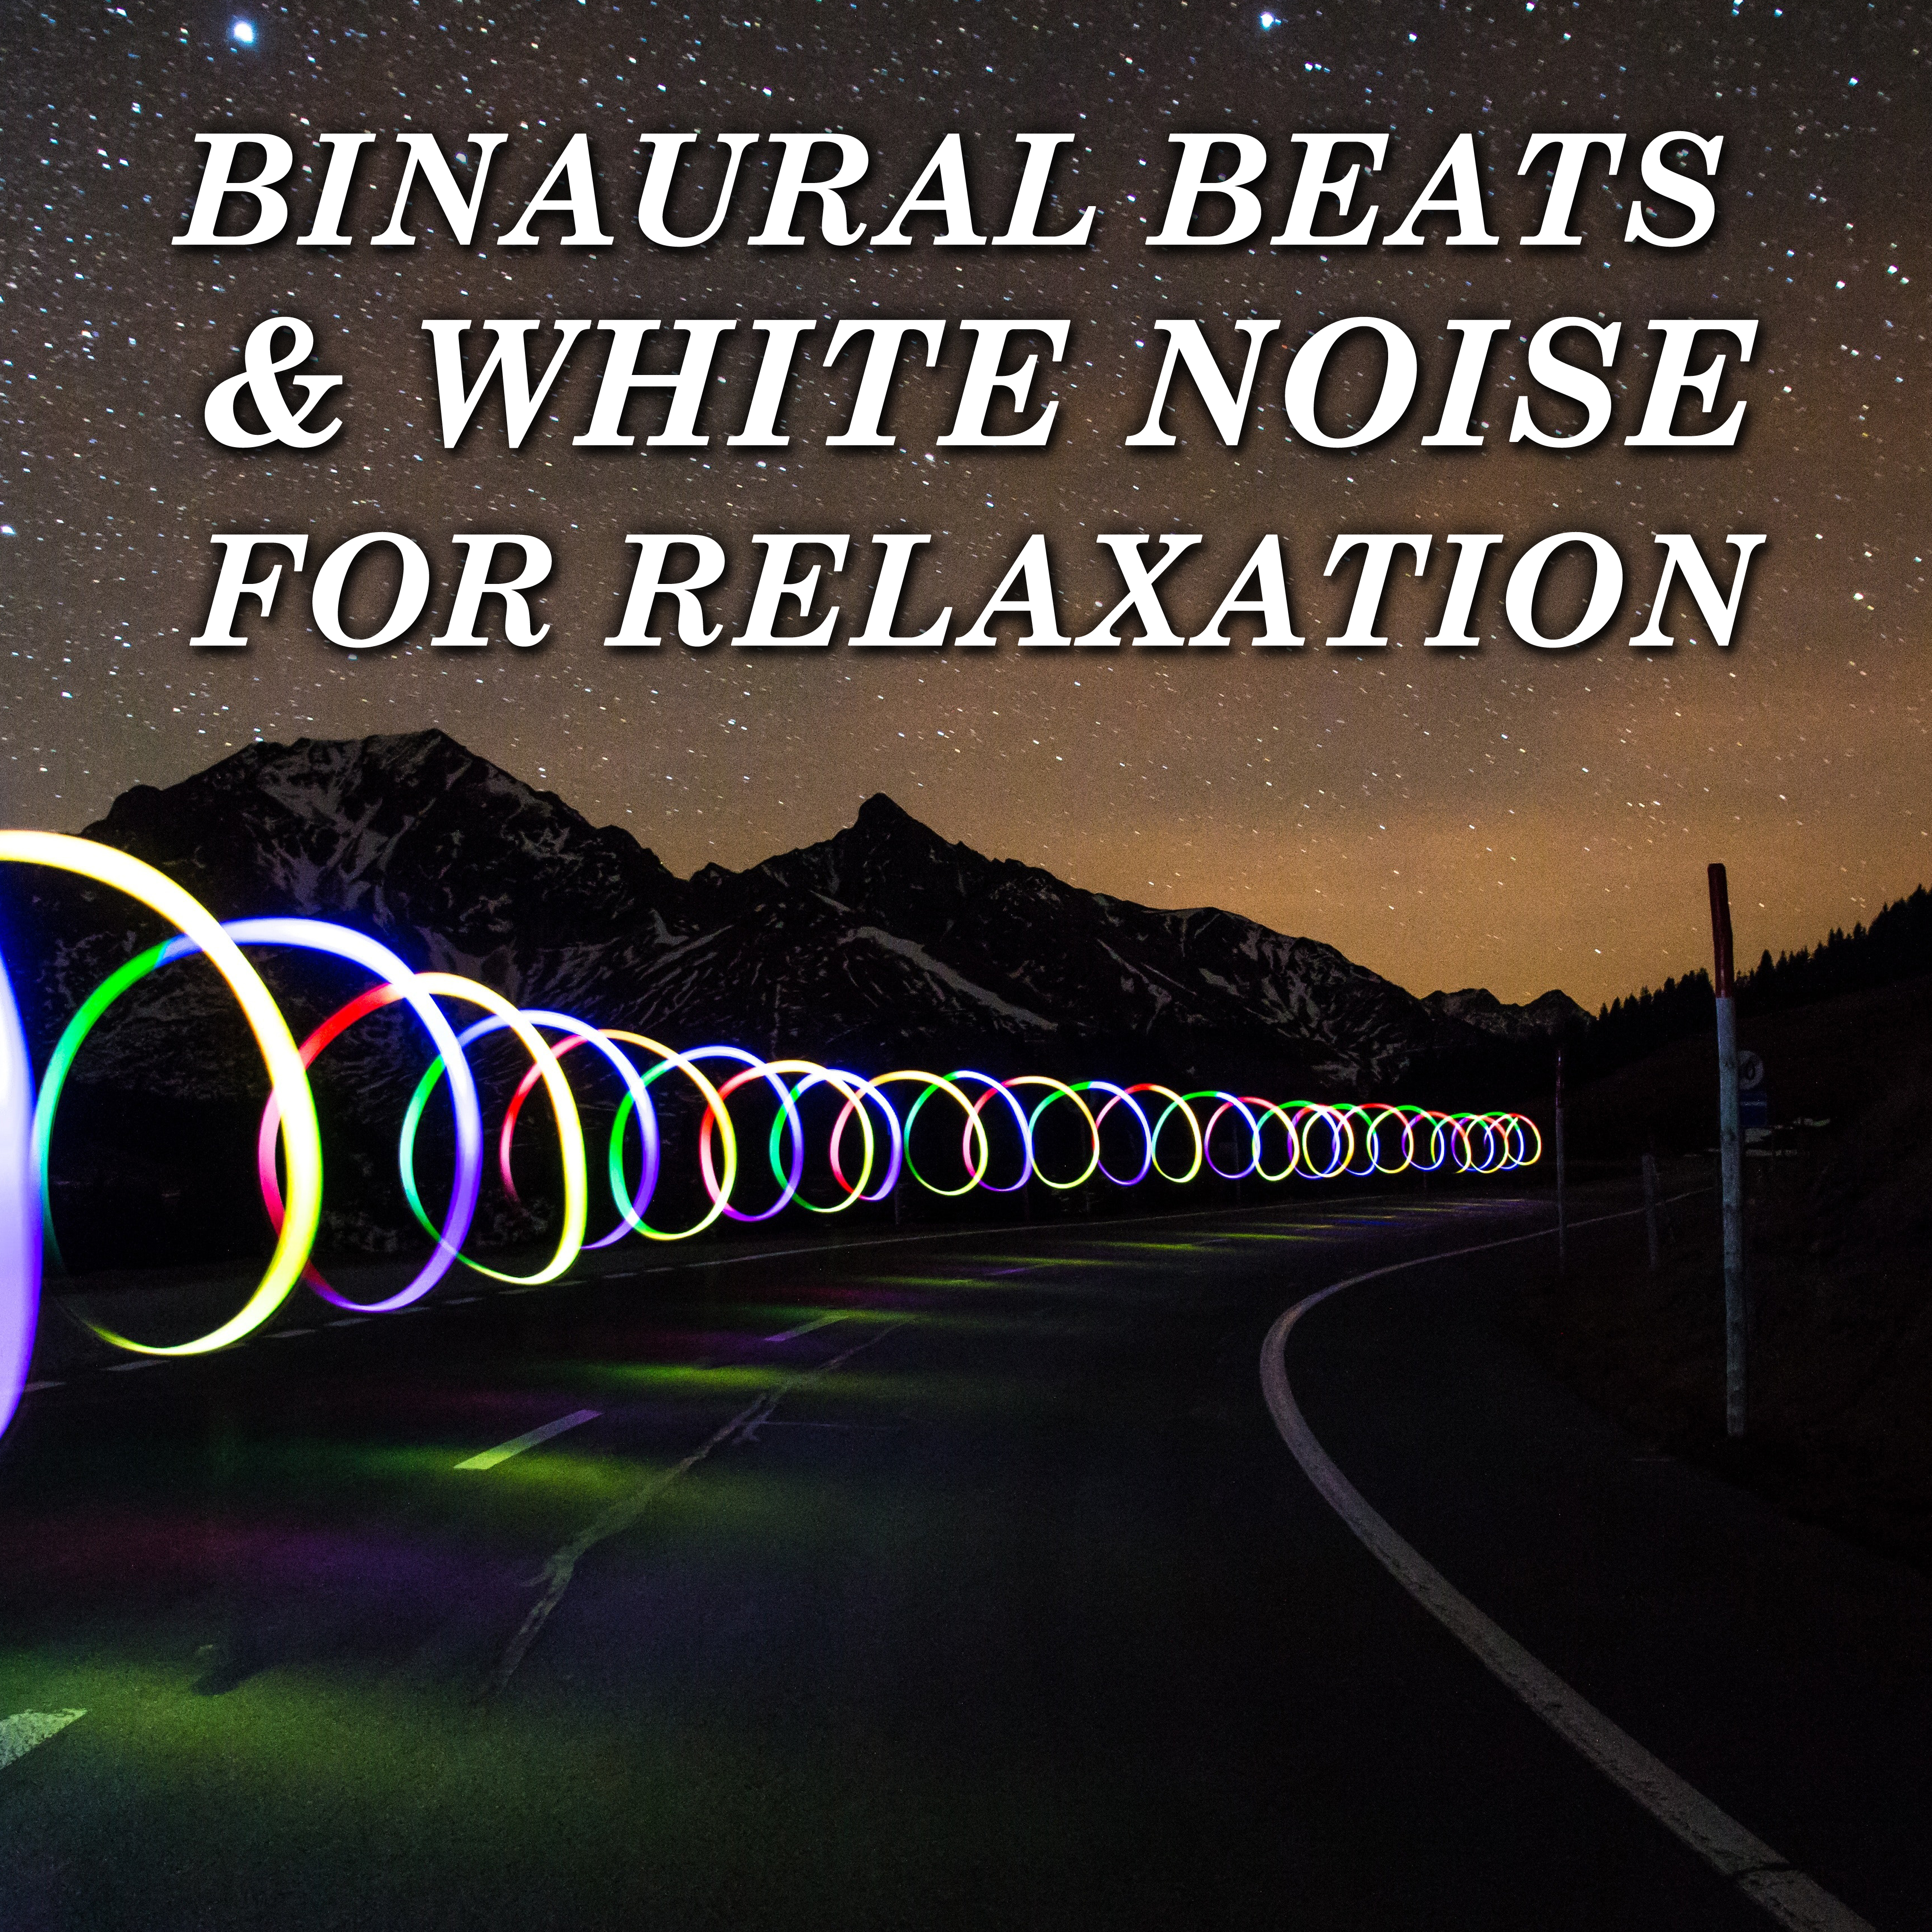 16 Binaural Beats & White Noise for Relaxation